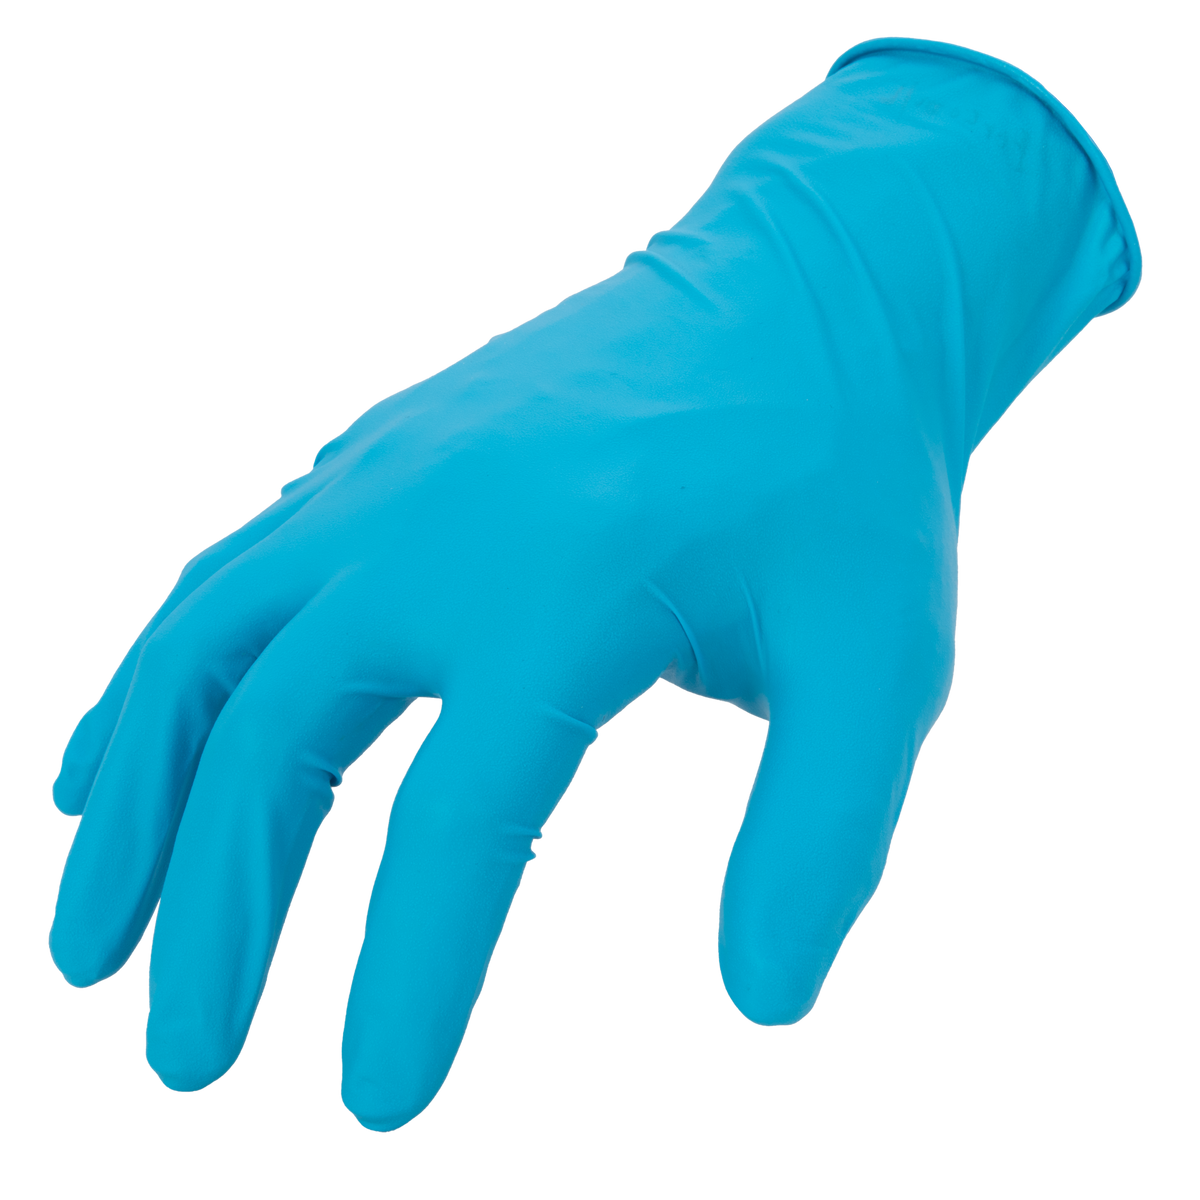 Firm Grip Painting Disposable Nitrile Gloves